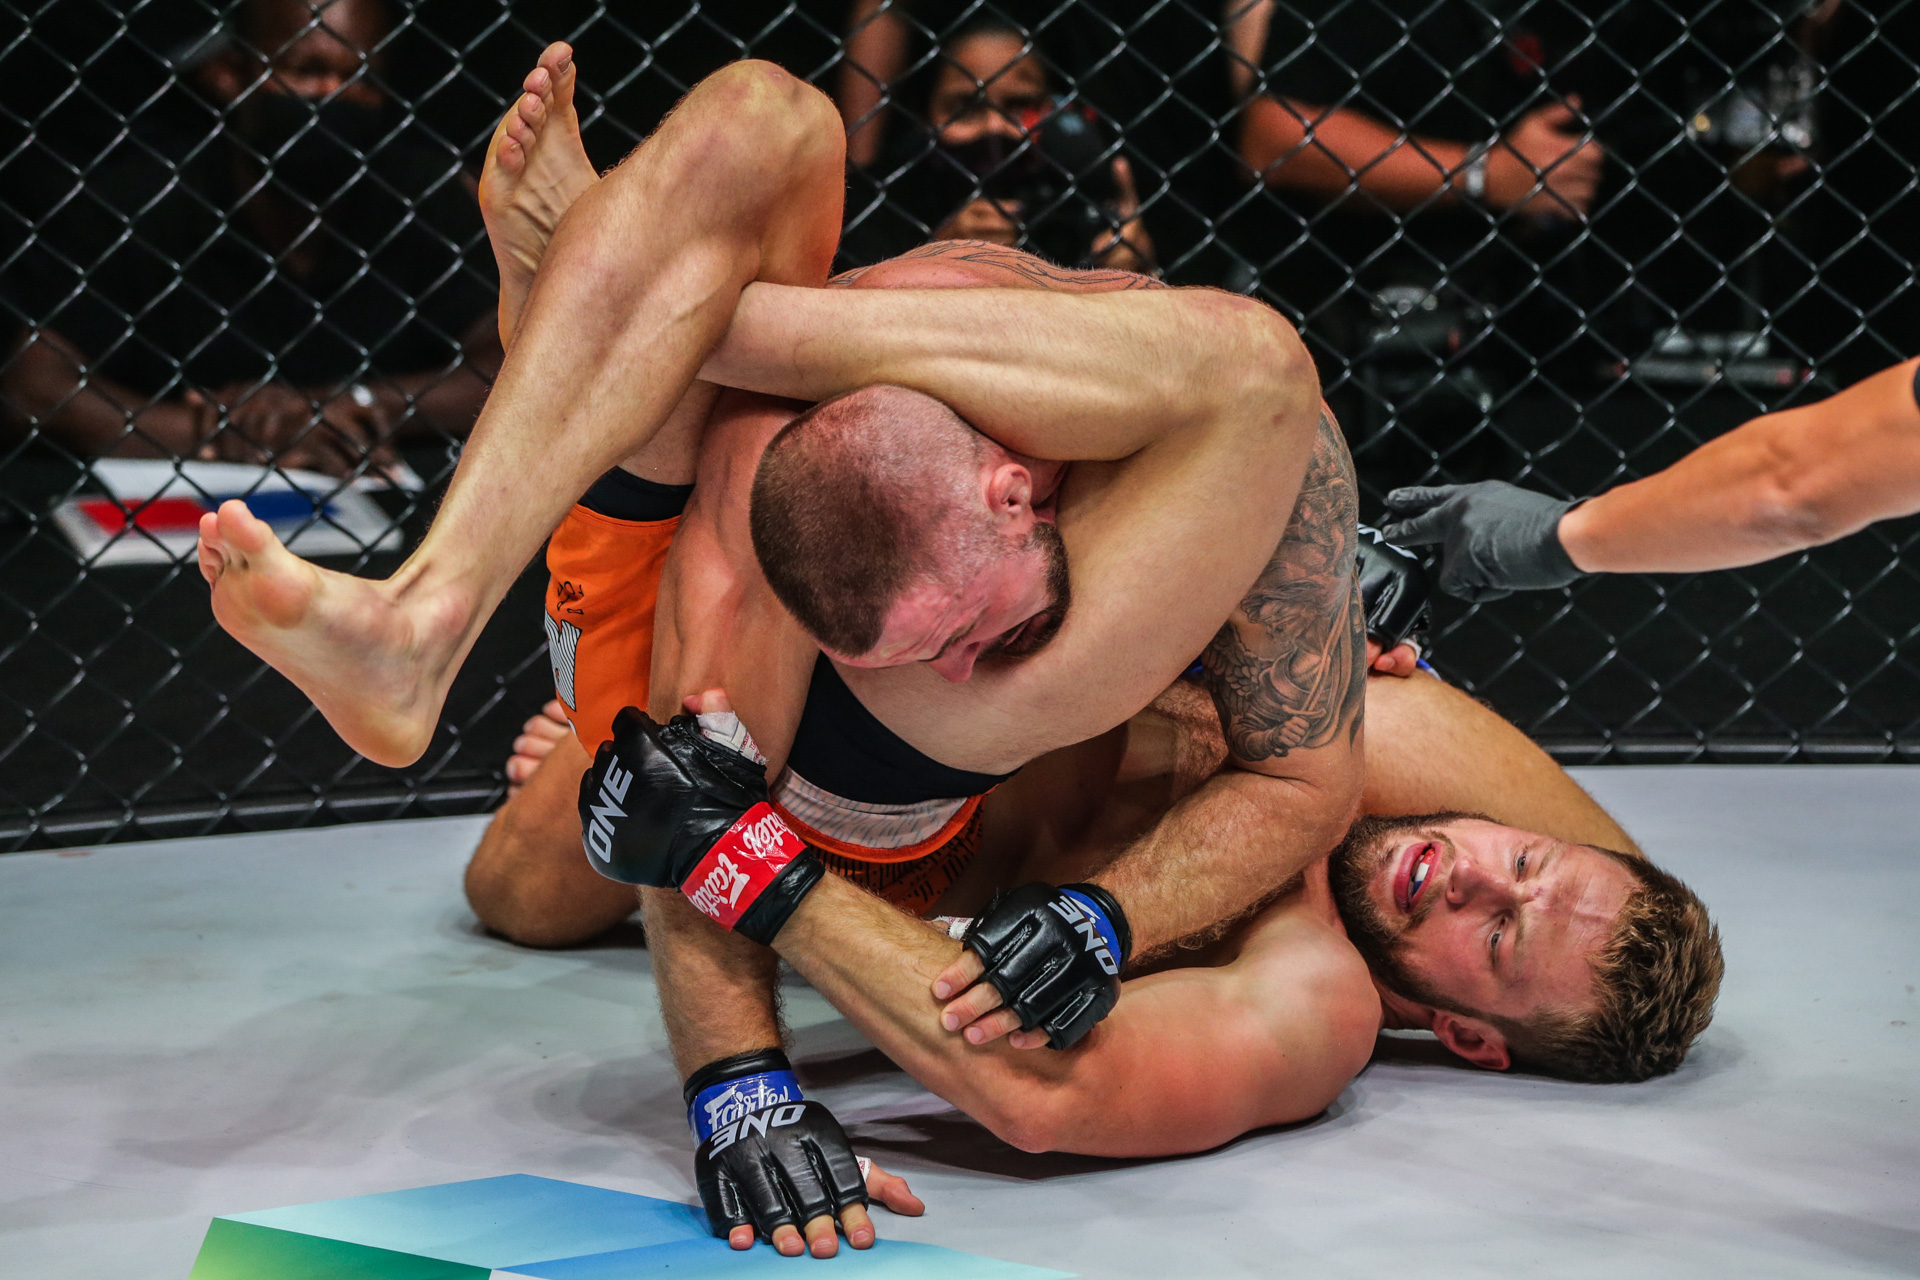 Reinier De Ridder defeats Vitaly Bigdash by submission at ONE 159